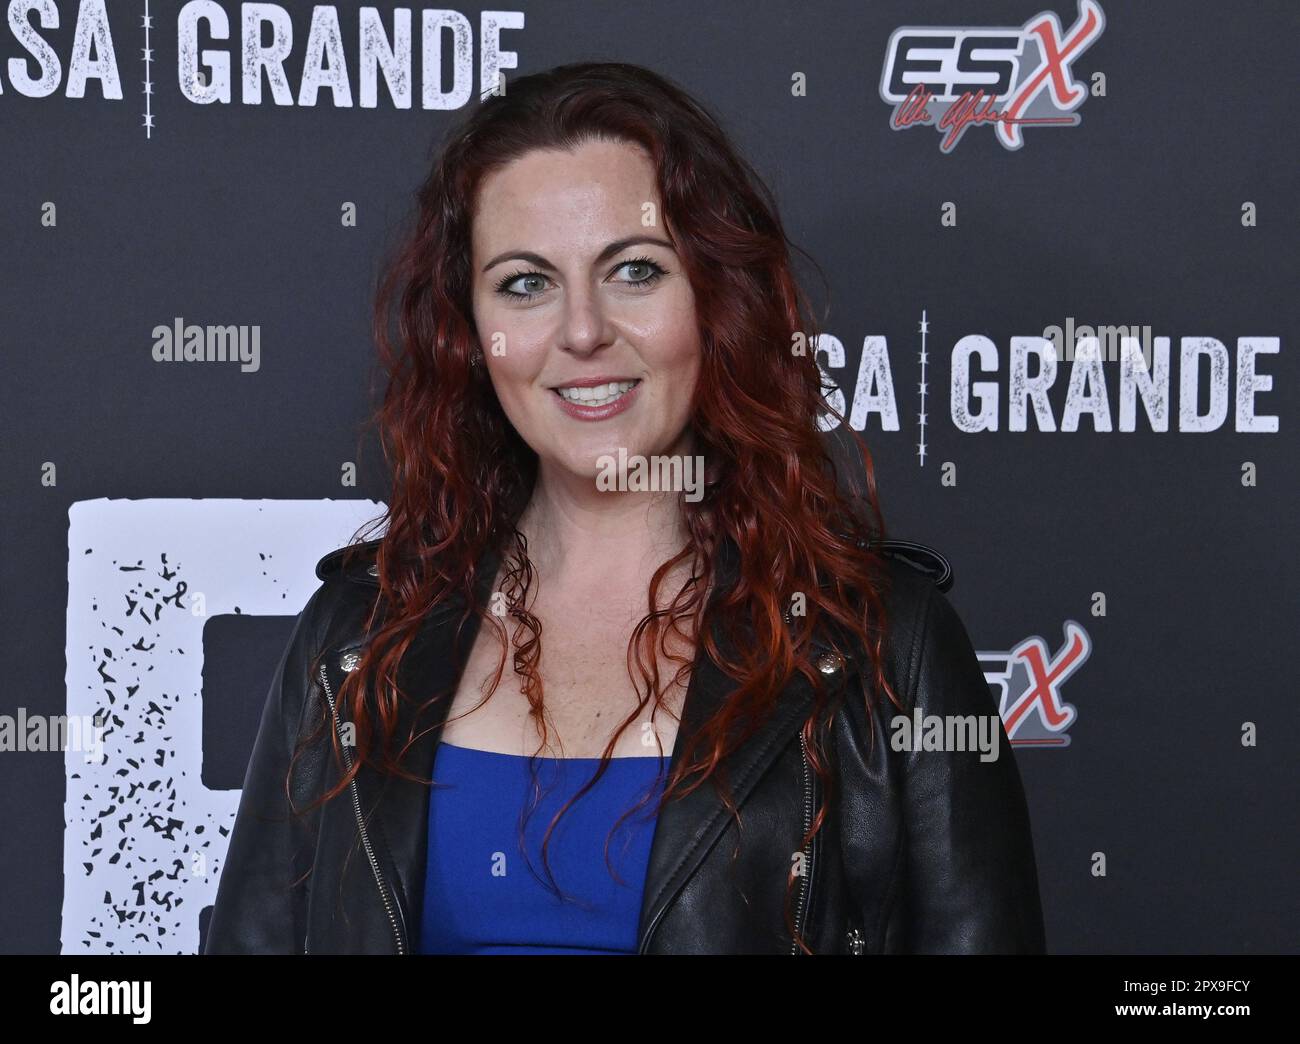 Burbank, United States. 01st May, 2023. Cast member Liz Anderson attends the premiere of Prime Video's TV series drama 'Casa Grande' at Warner Bros. Studios in Burbank, California on Monday, May 1, 2023. Storyline: Follows several families in the farmland of Northern California as it navigates universal themes of class, immigration, culture and family. Photo by Jim Ruymen/UPI Credit: UPI/Alamy Live News Stock Photo